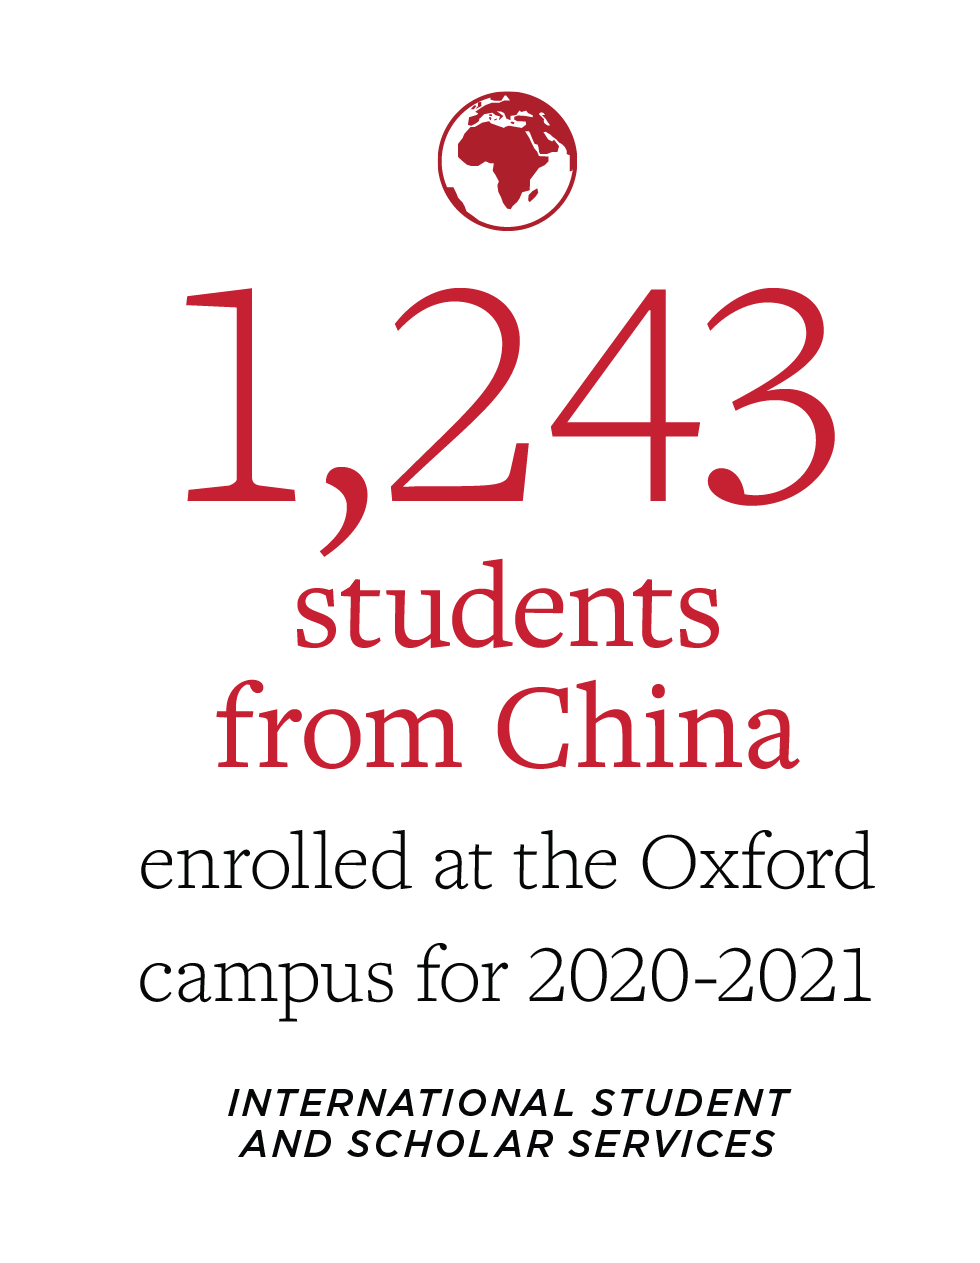 1243 students from china enrolled at the oxford campus for 2020-2021. International Student and scholar services.